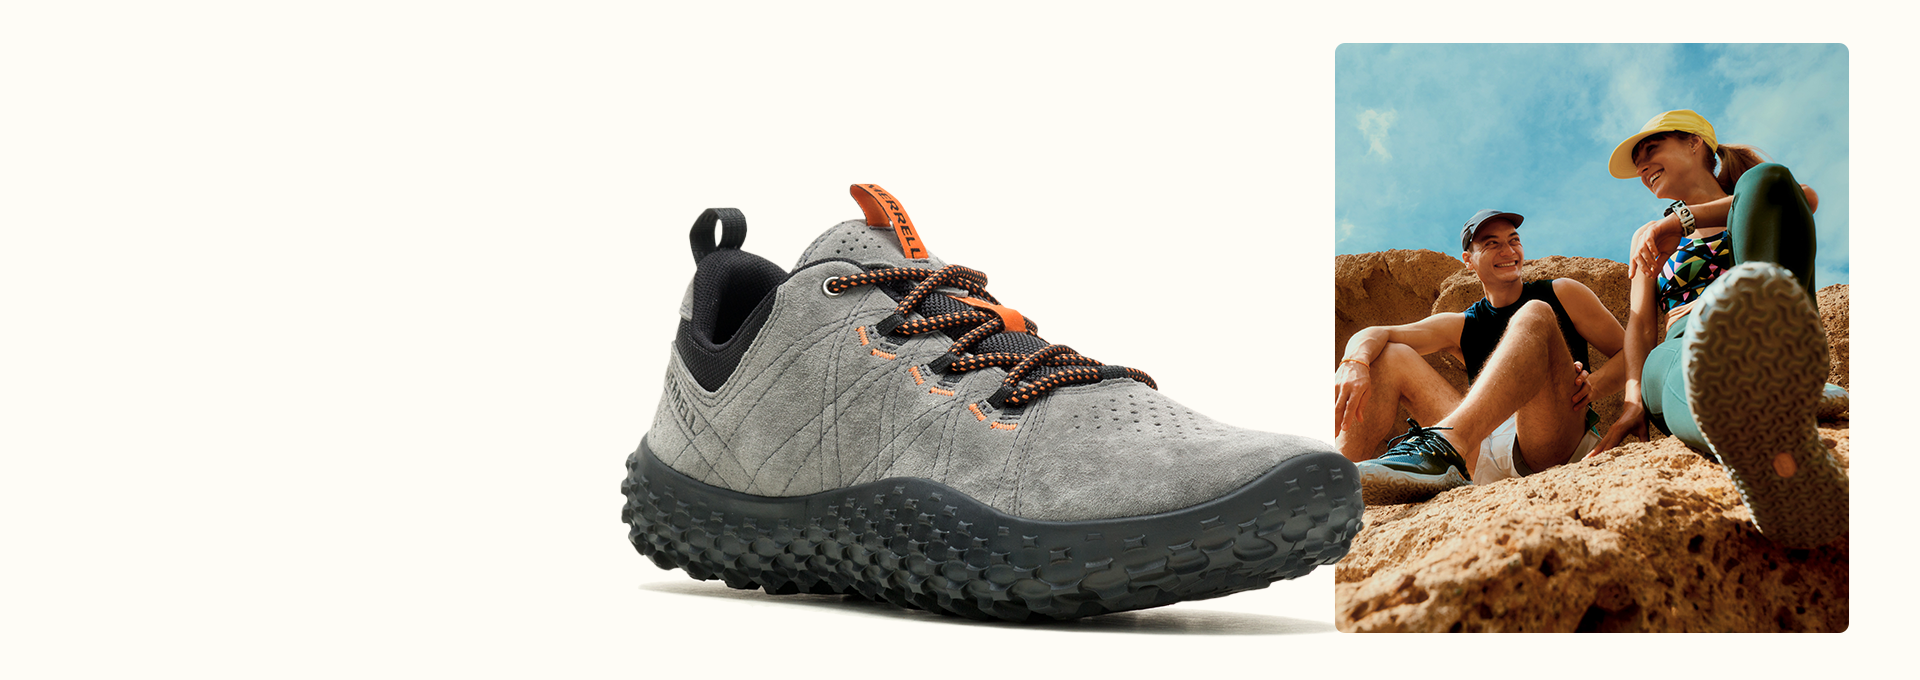 A close up of Merrell Wrapt shoe.